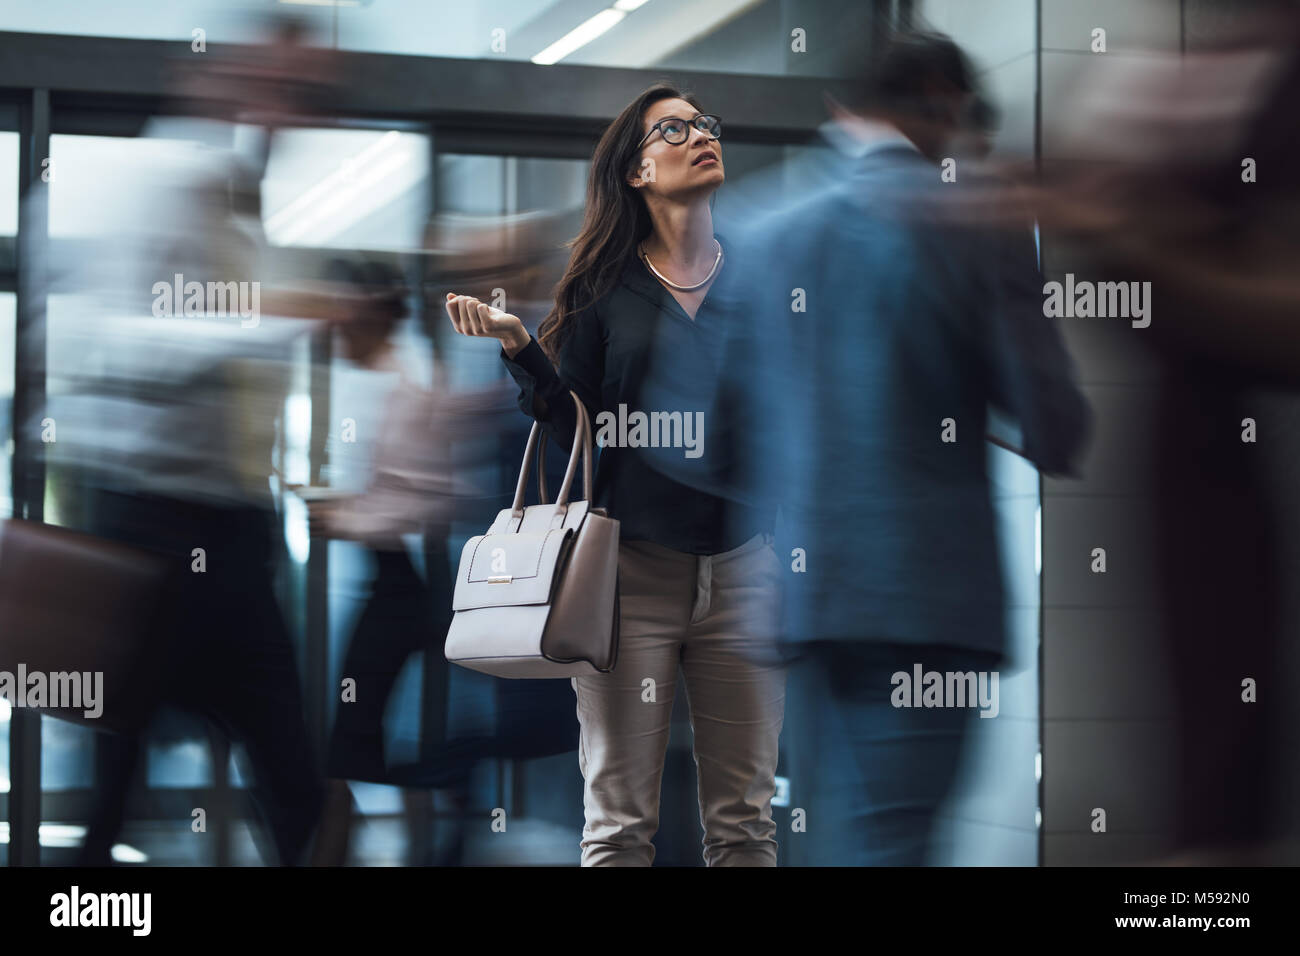 Businesswoman standing and looking upwards while waiting for someone with people rushing in the lobby. Motion blur effect. Stock Photo